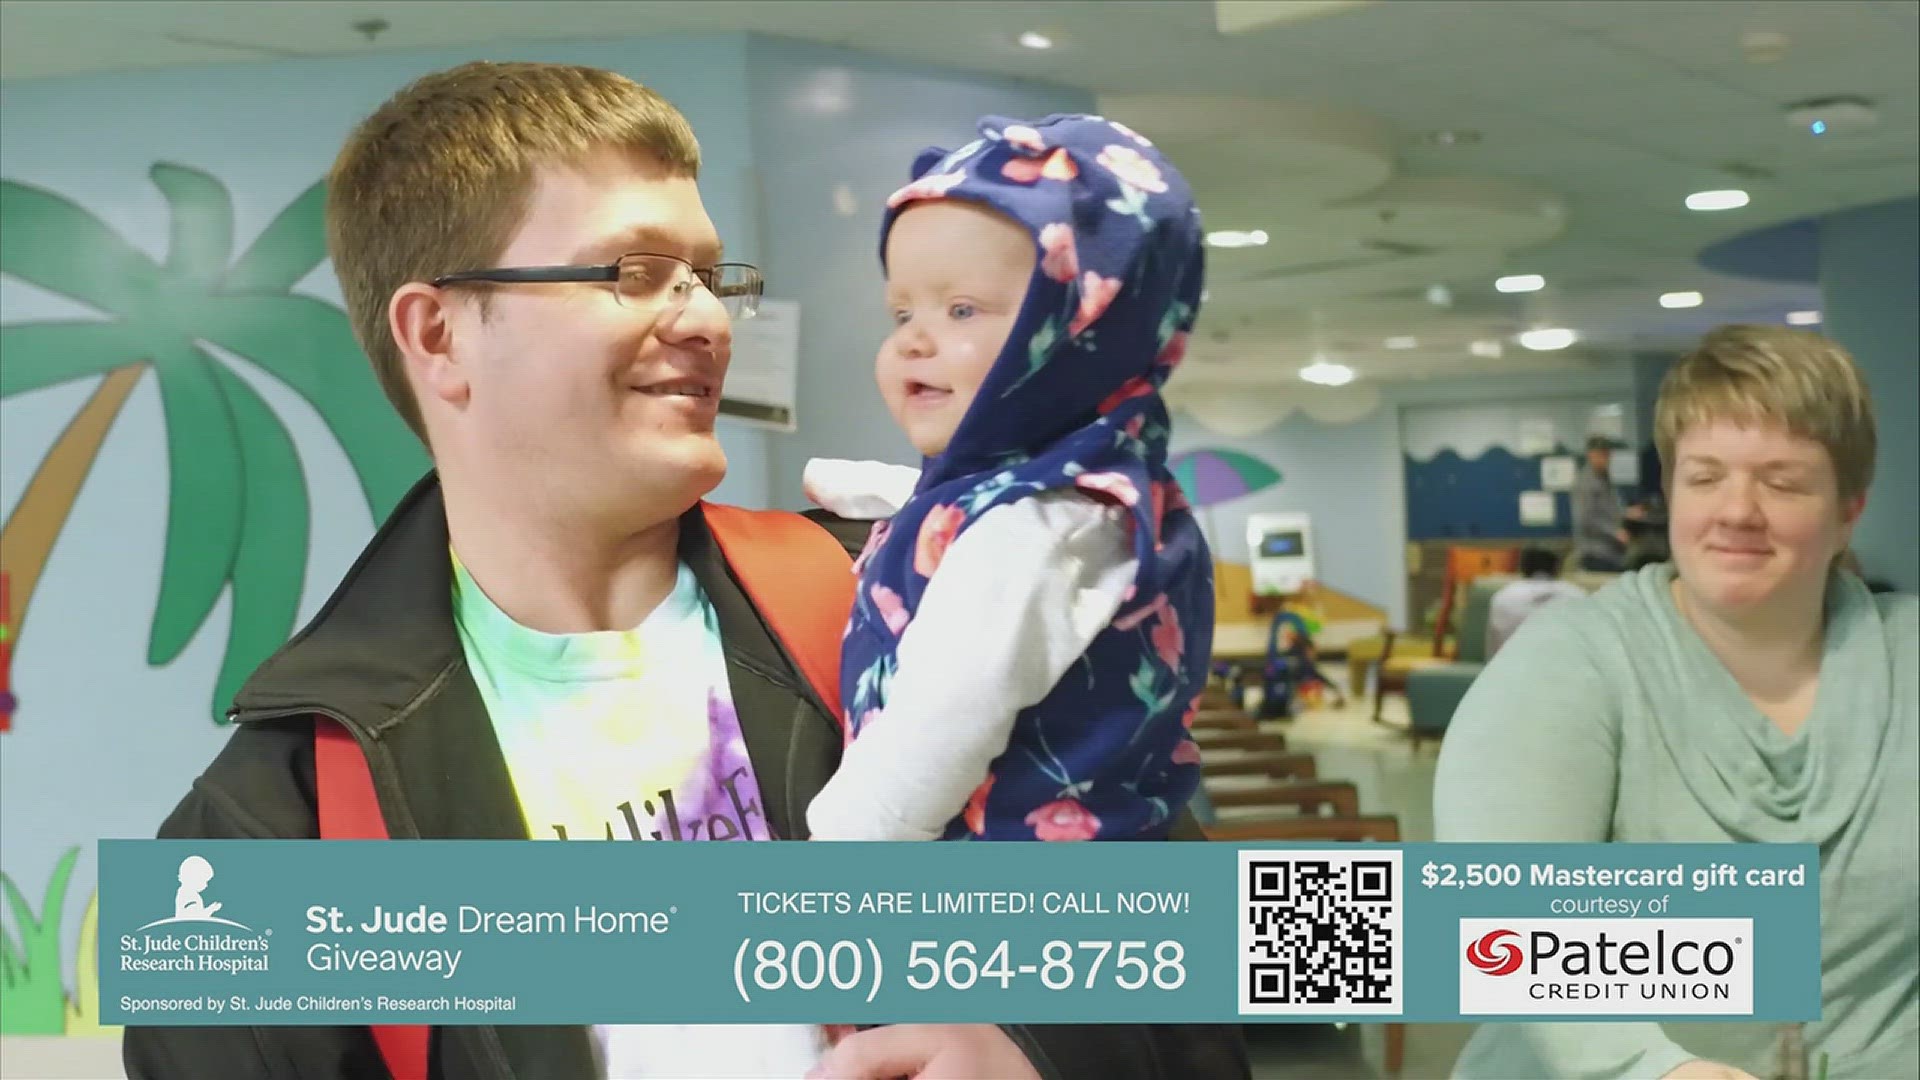 Hear from four families who received care from St. Jude Children's Research Hospital and how your support helps. Sponsored by St. Jude Children's Research Hospital.